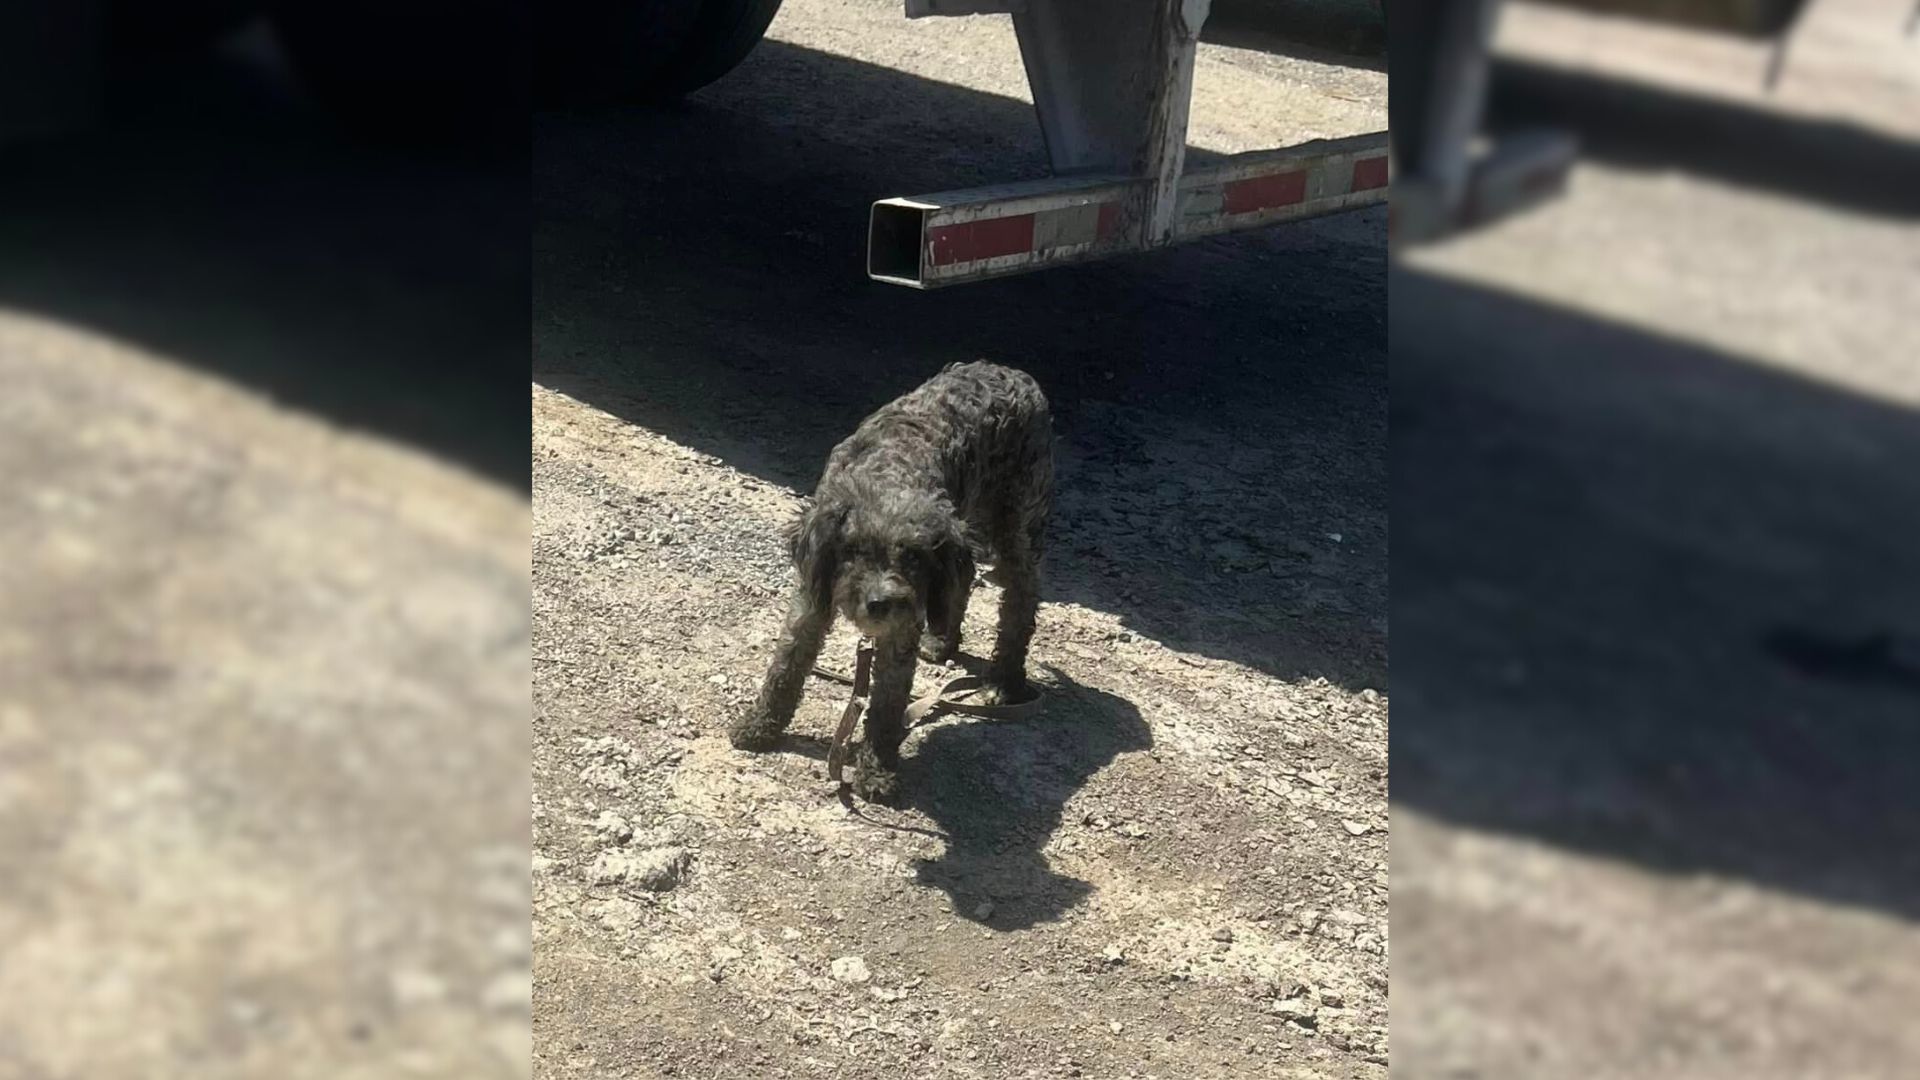 Heartbroken Rescuer Finds Dog Struggling In A Truck Yard And Decides To Help